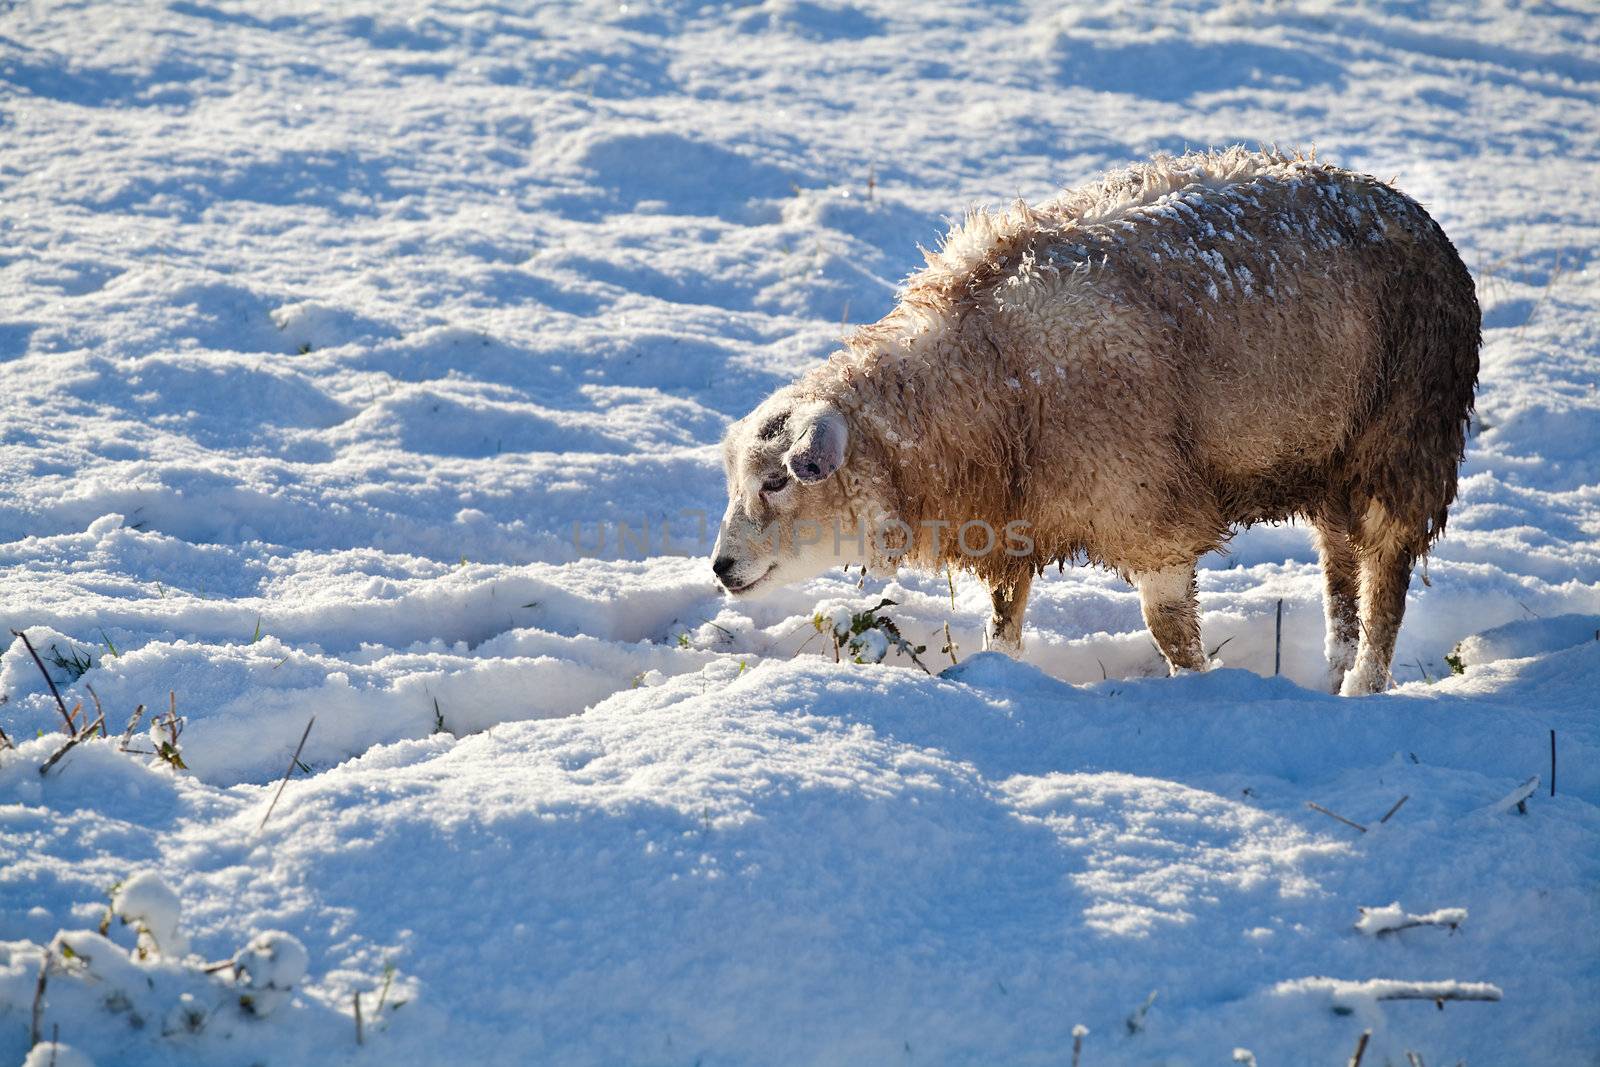 Dutch sheep on snow by catolla